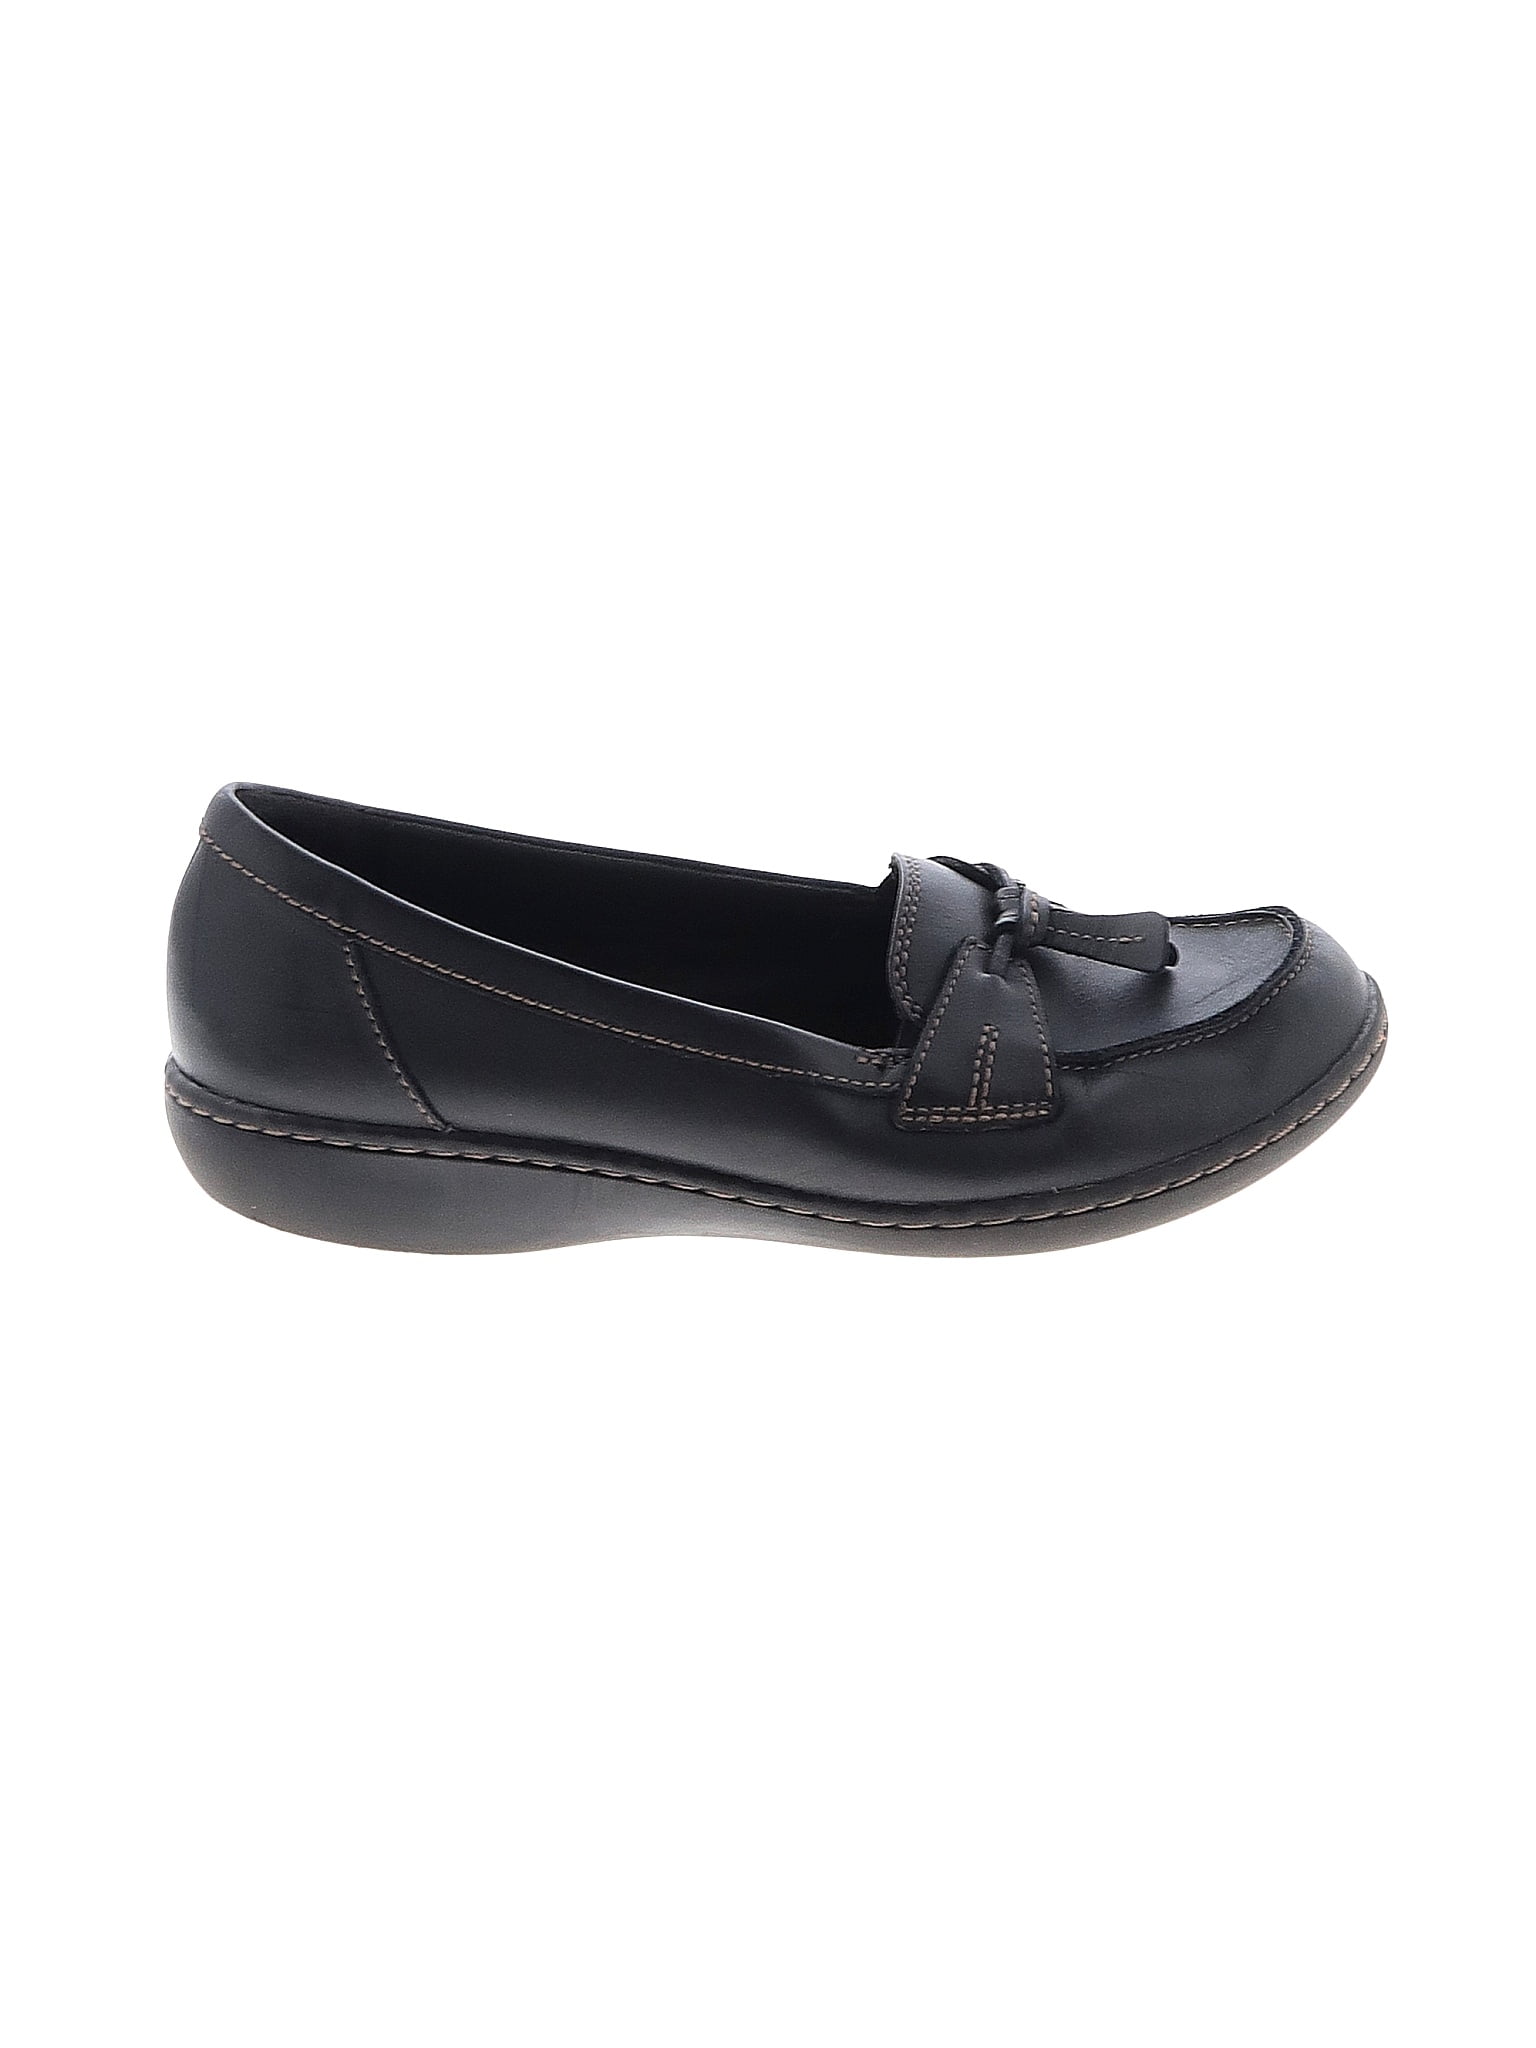 Clarks Solid Black Flats Size 7 1/2 - 66% off